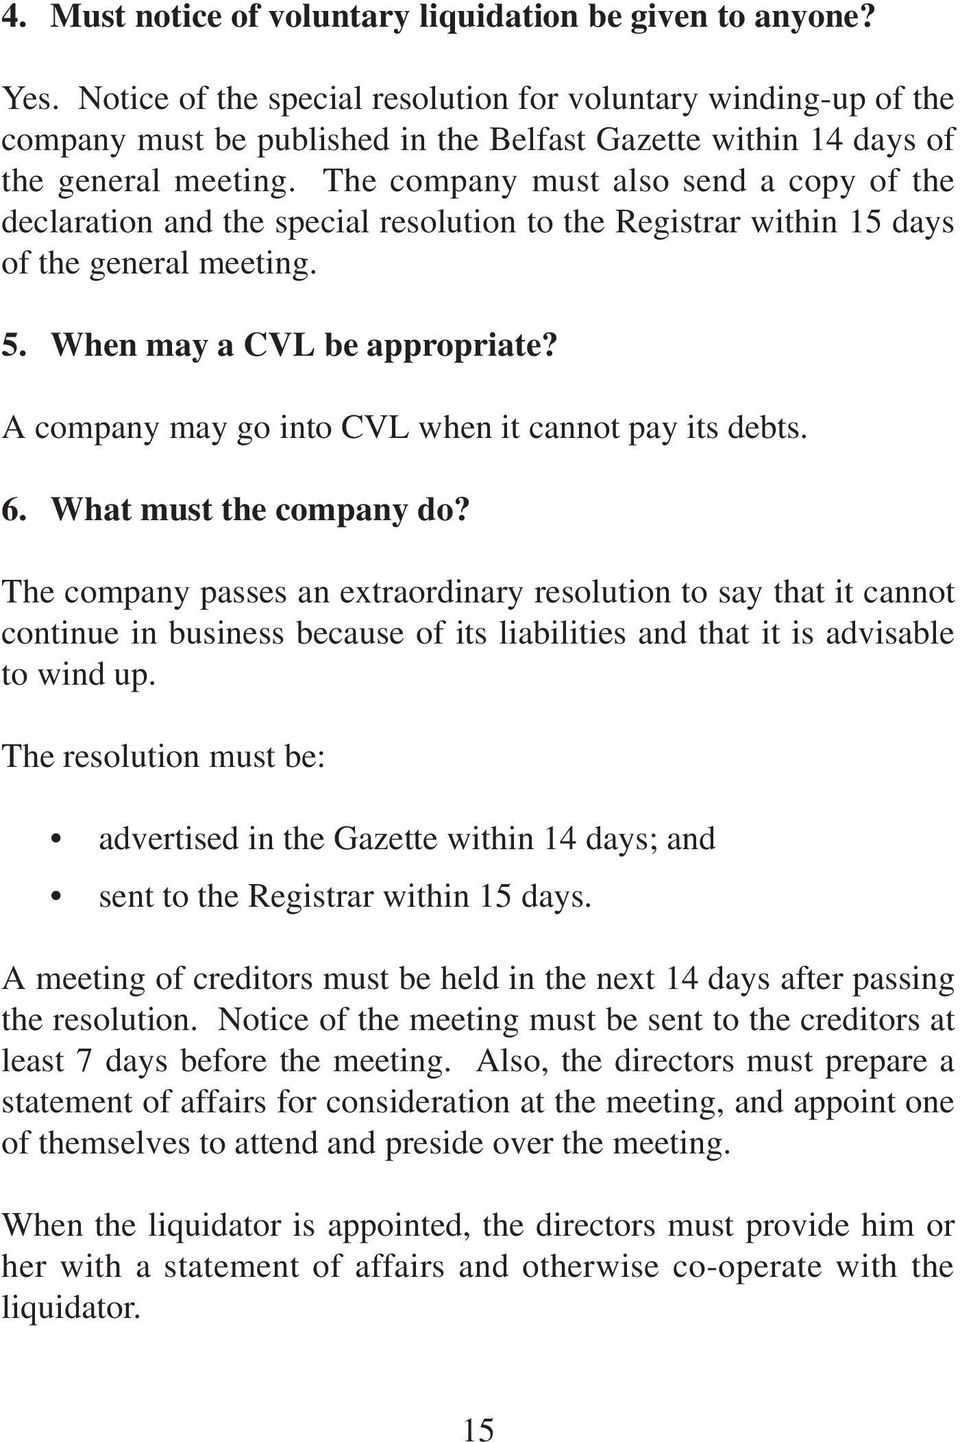 The company must also send a copy of the declaration and the special resolution to the Registrar within 15 days of the general meeting. 5. When may a CVL be appropriate?